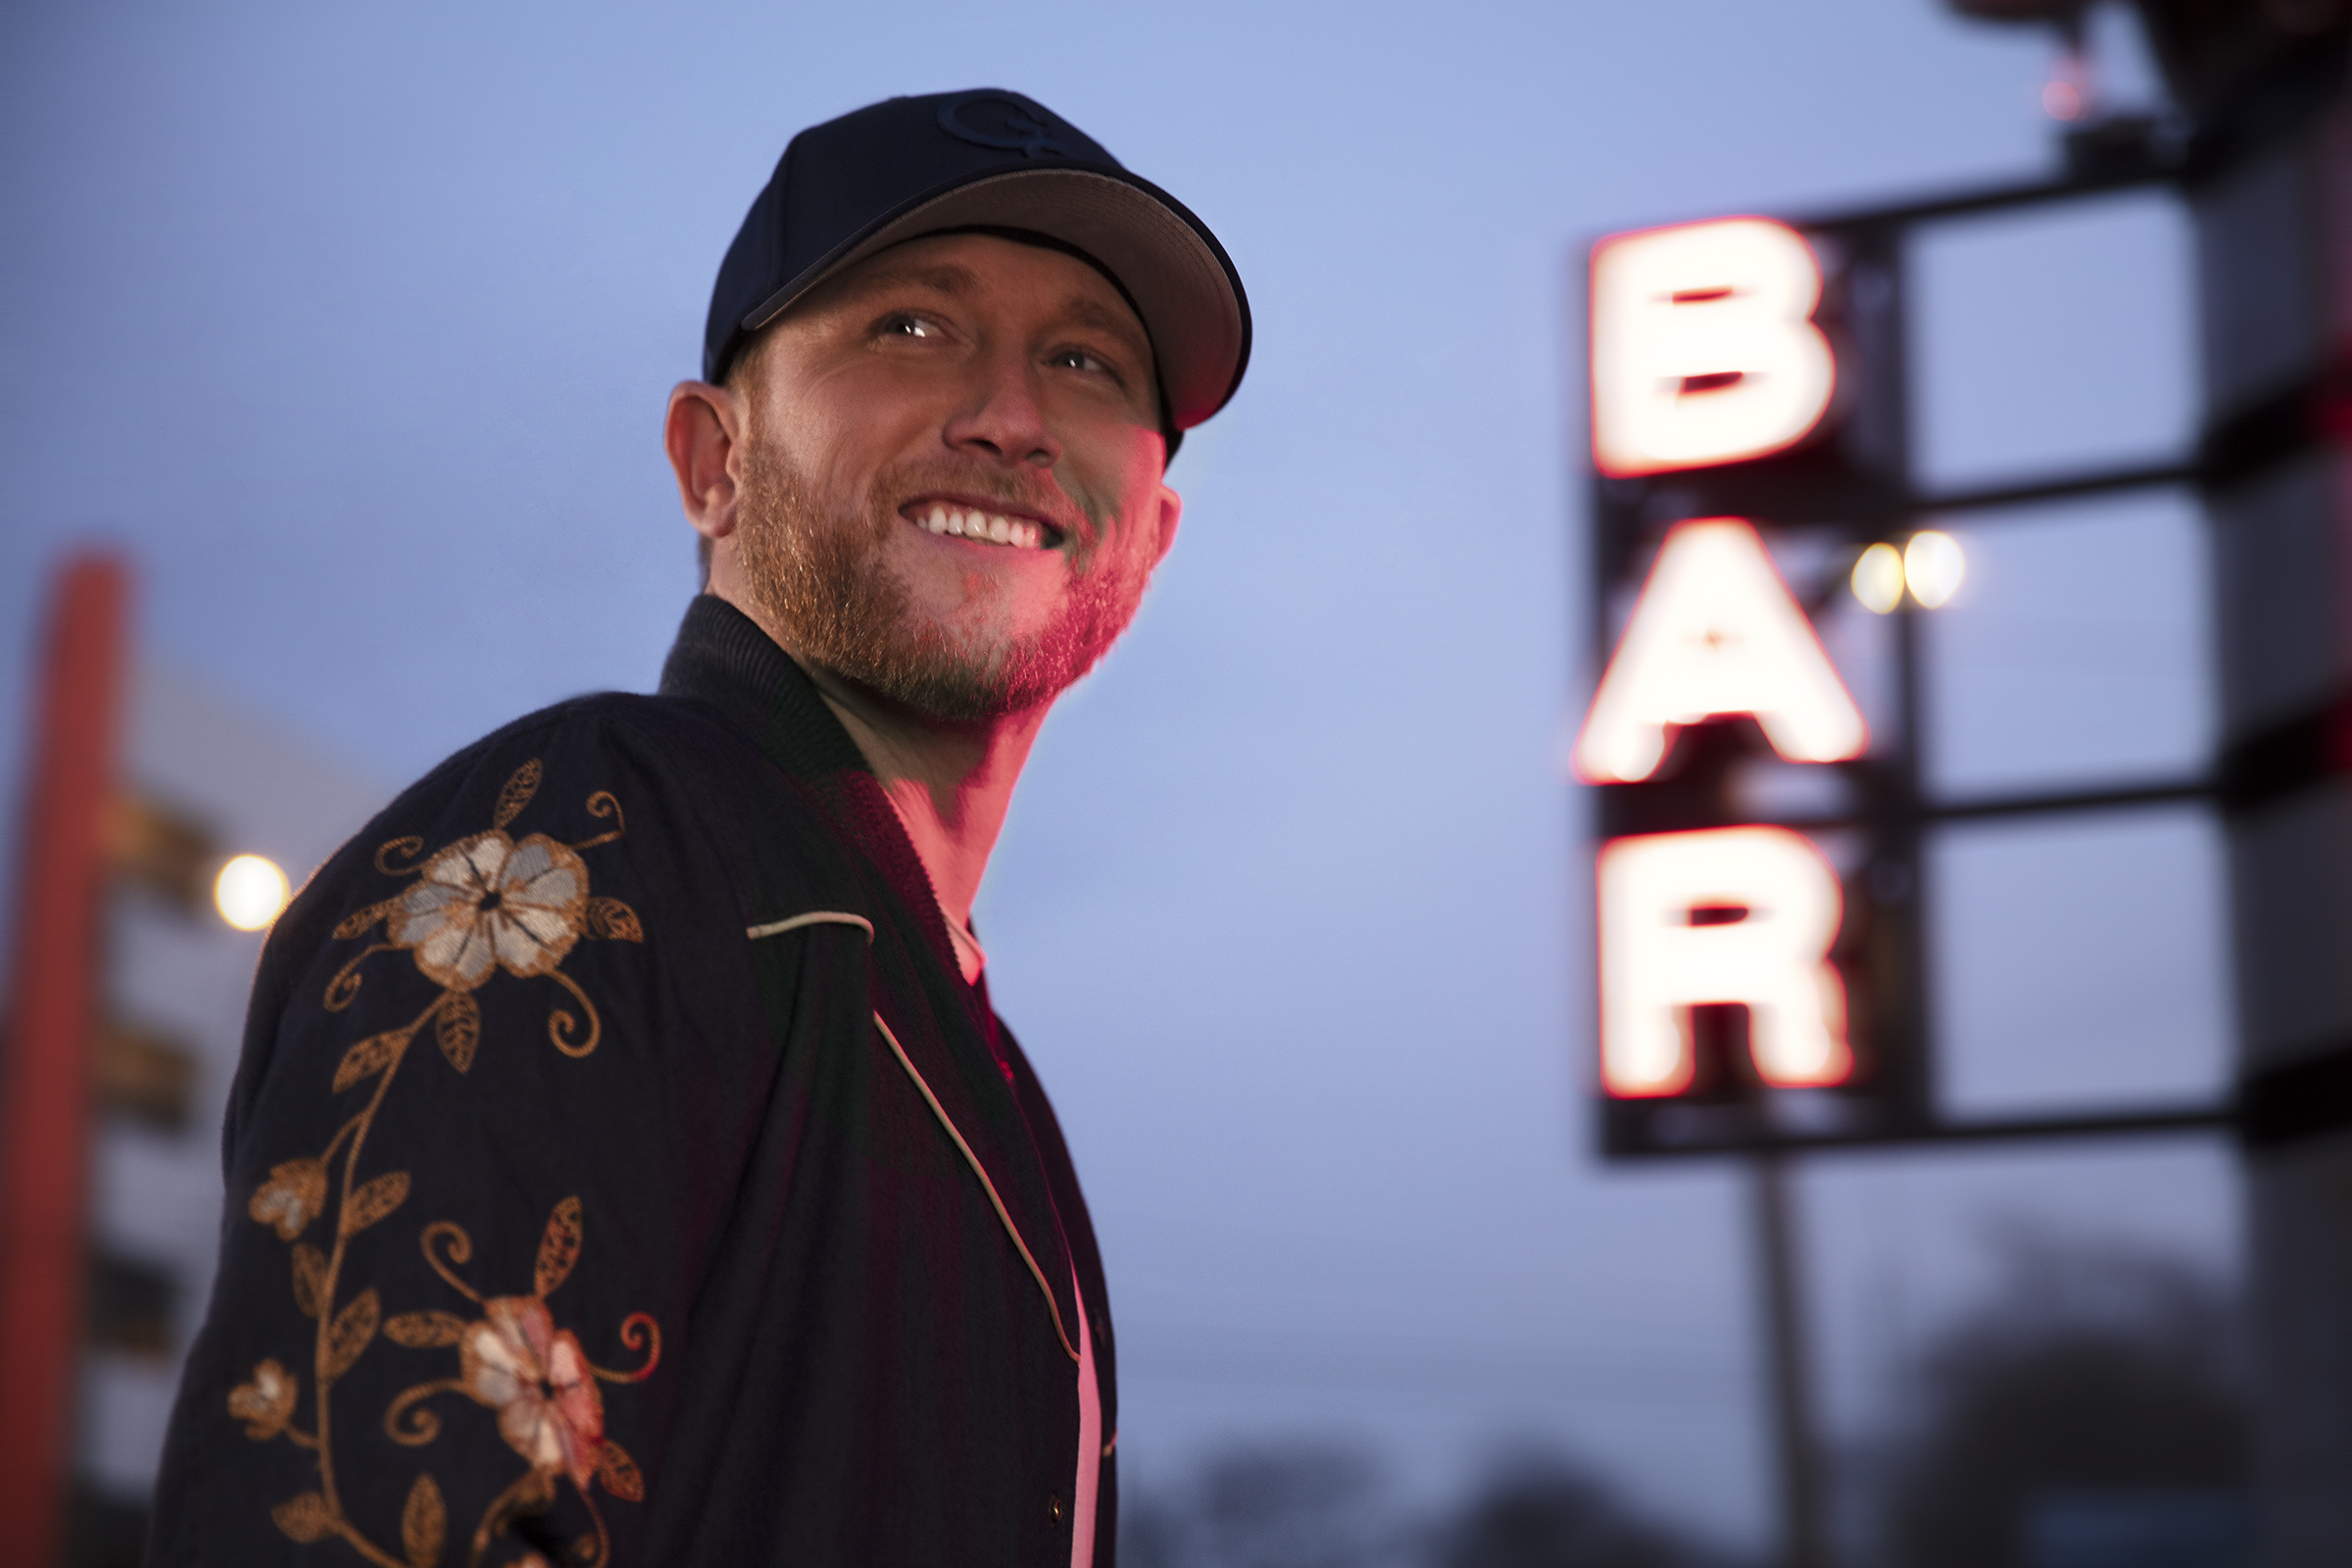 COLE SWINDELL RELEASES ACOUSTIC VIDEO FOR "SINGLE SATURDAY NIGHT"